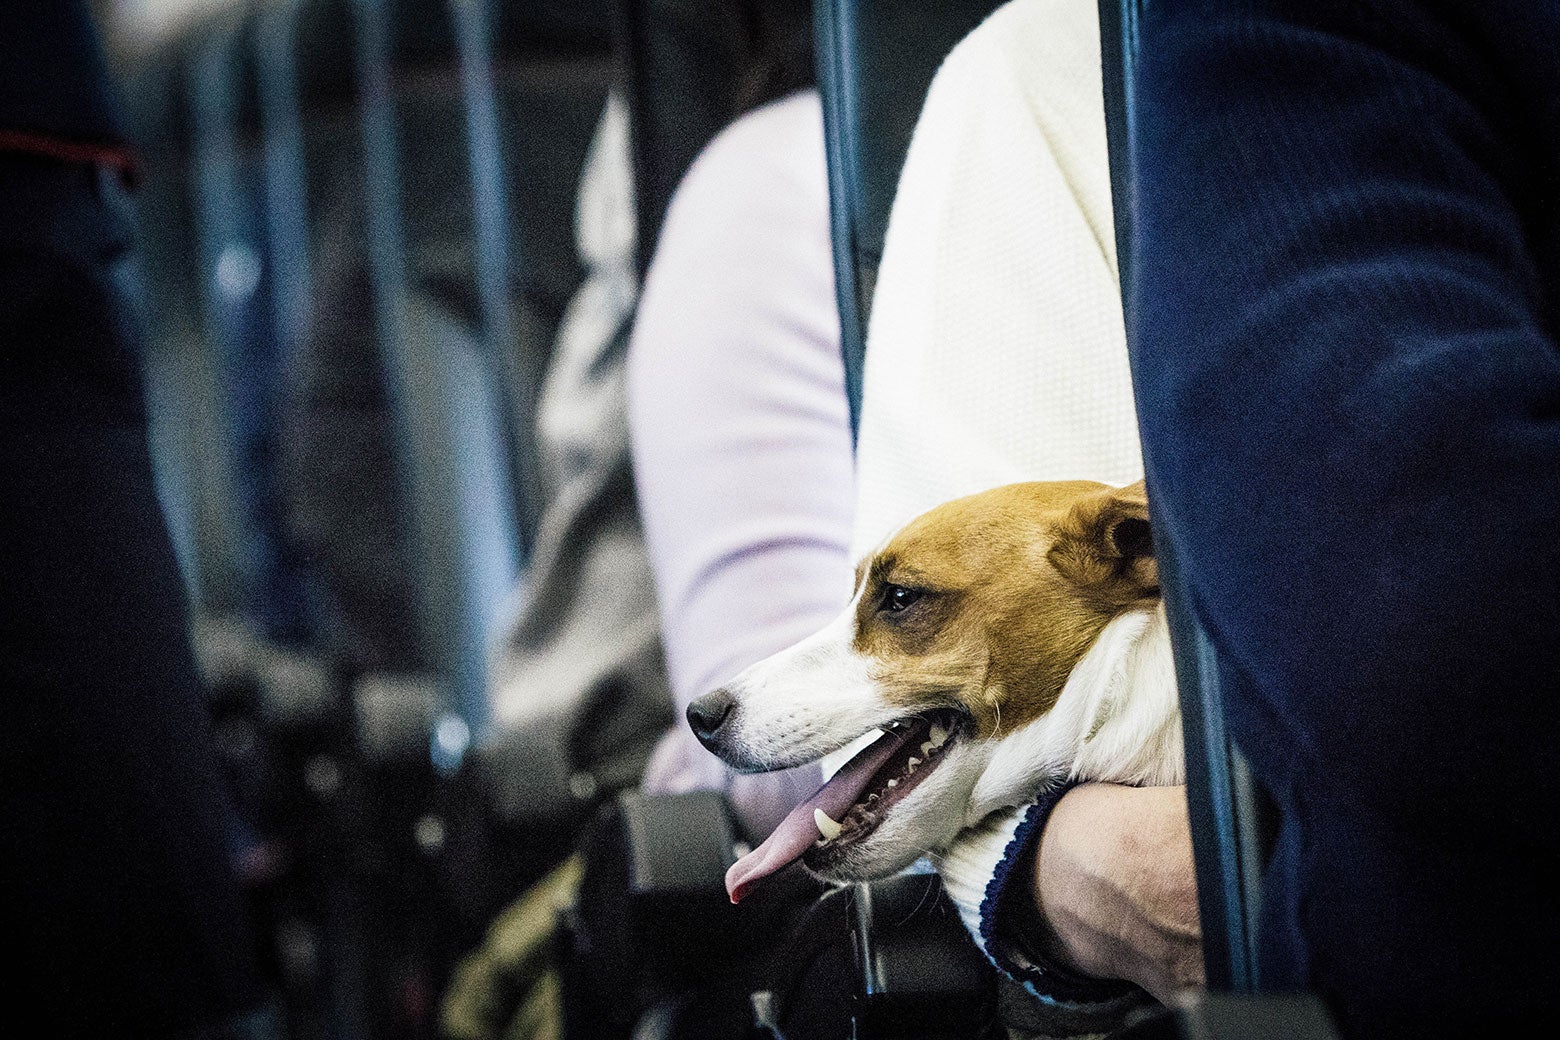 A dog is seen on the lap of its owner on a plane.